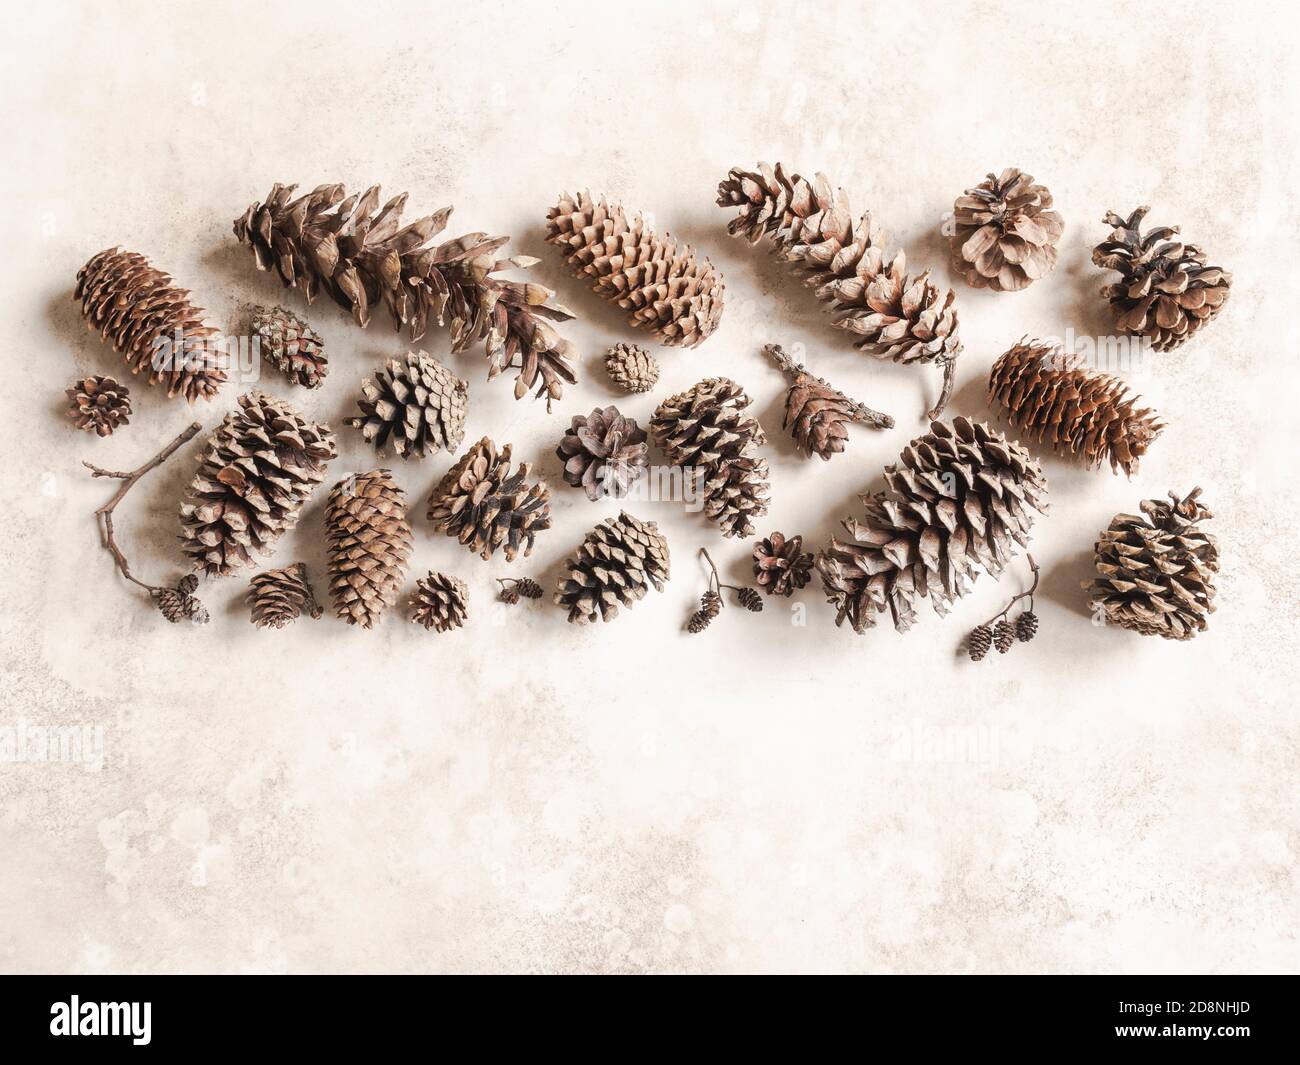 Collection of various conifers cones. Christmas set various cones of sequoia, pine, spruce, fir on brown background. Botanical evergreen flat lay. Stock Photo